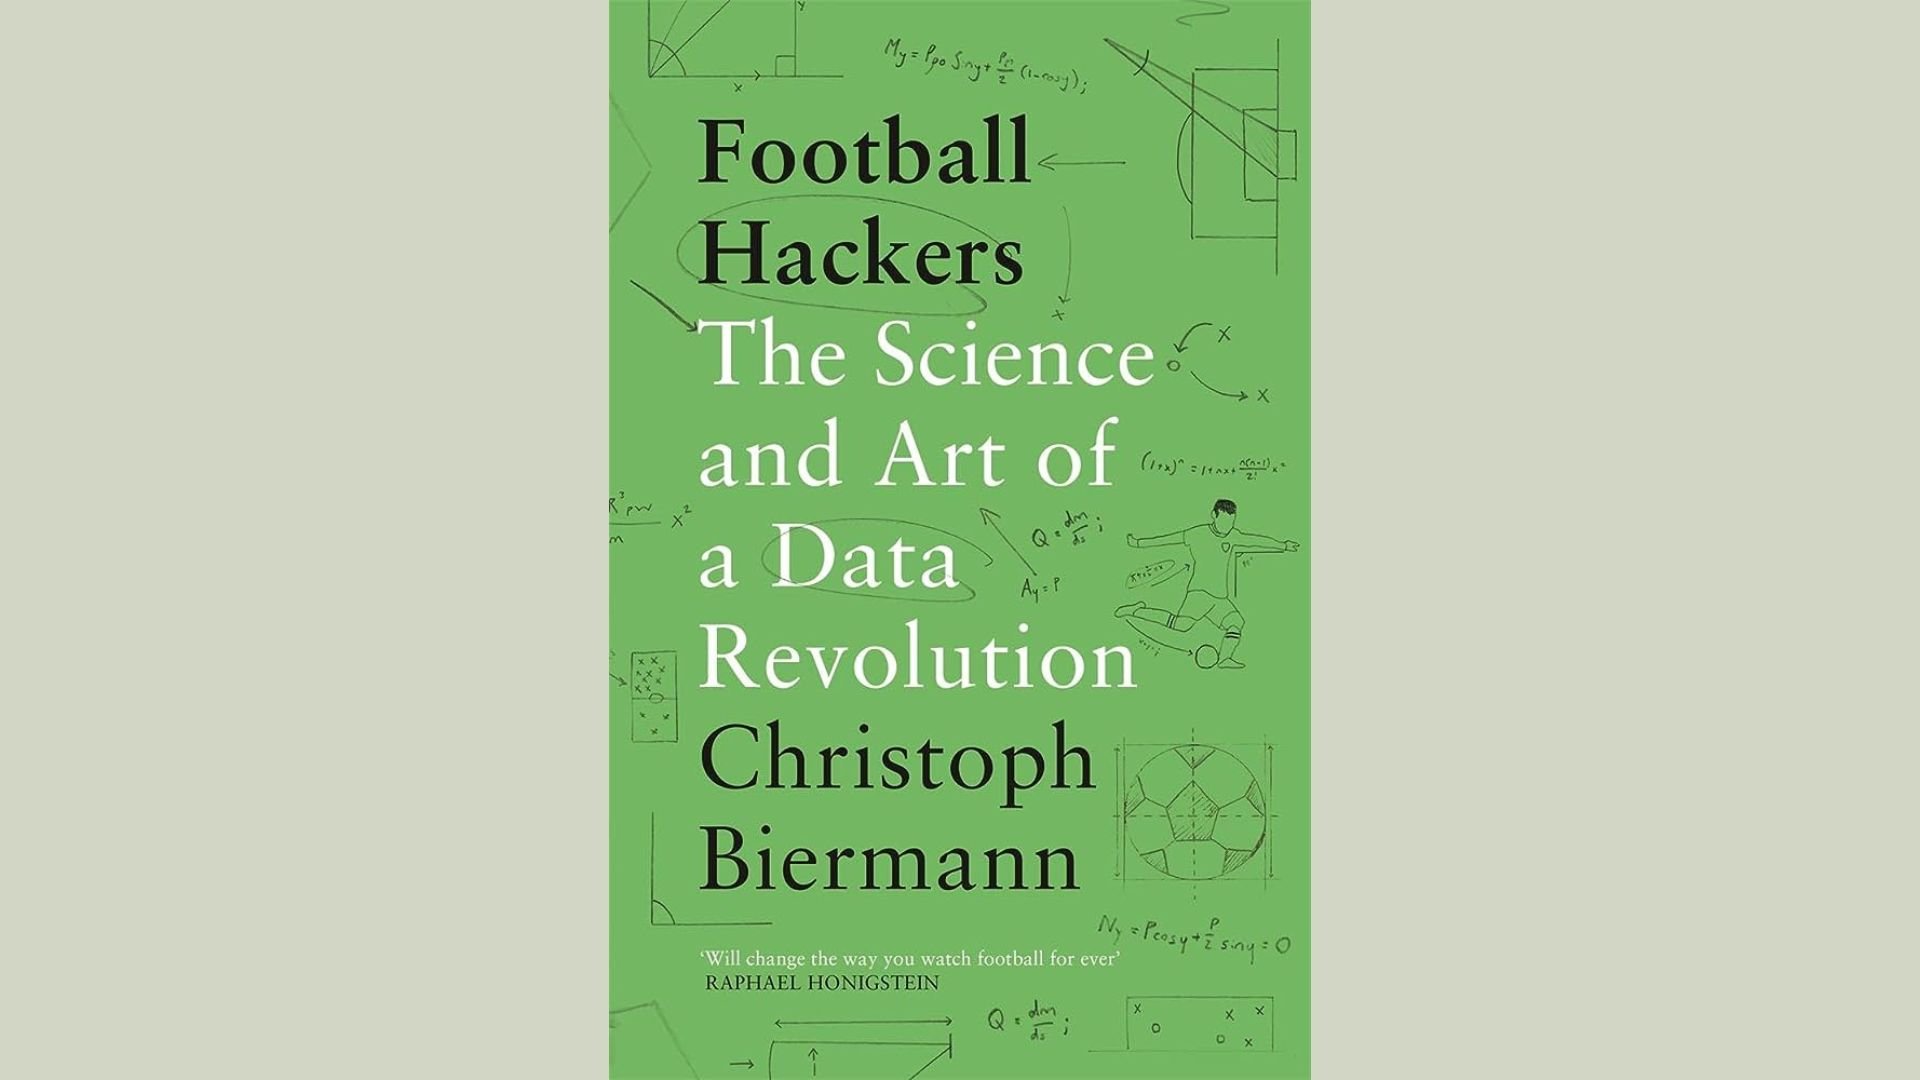 Football Hackers: The Science and Art of a Data Revolution (Christoph Biermann) - Book Summary, Notes & Highlights